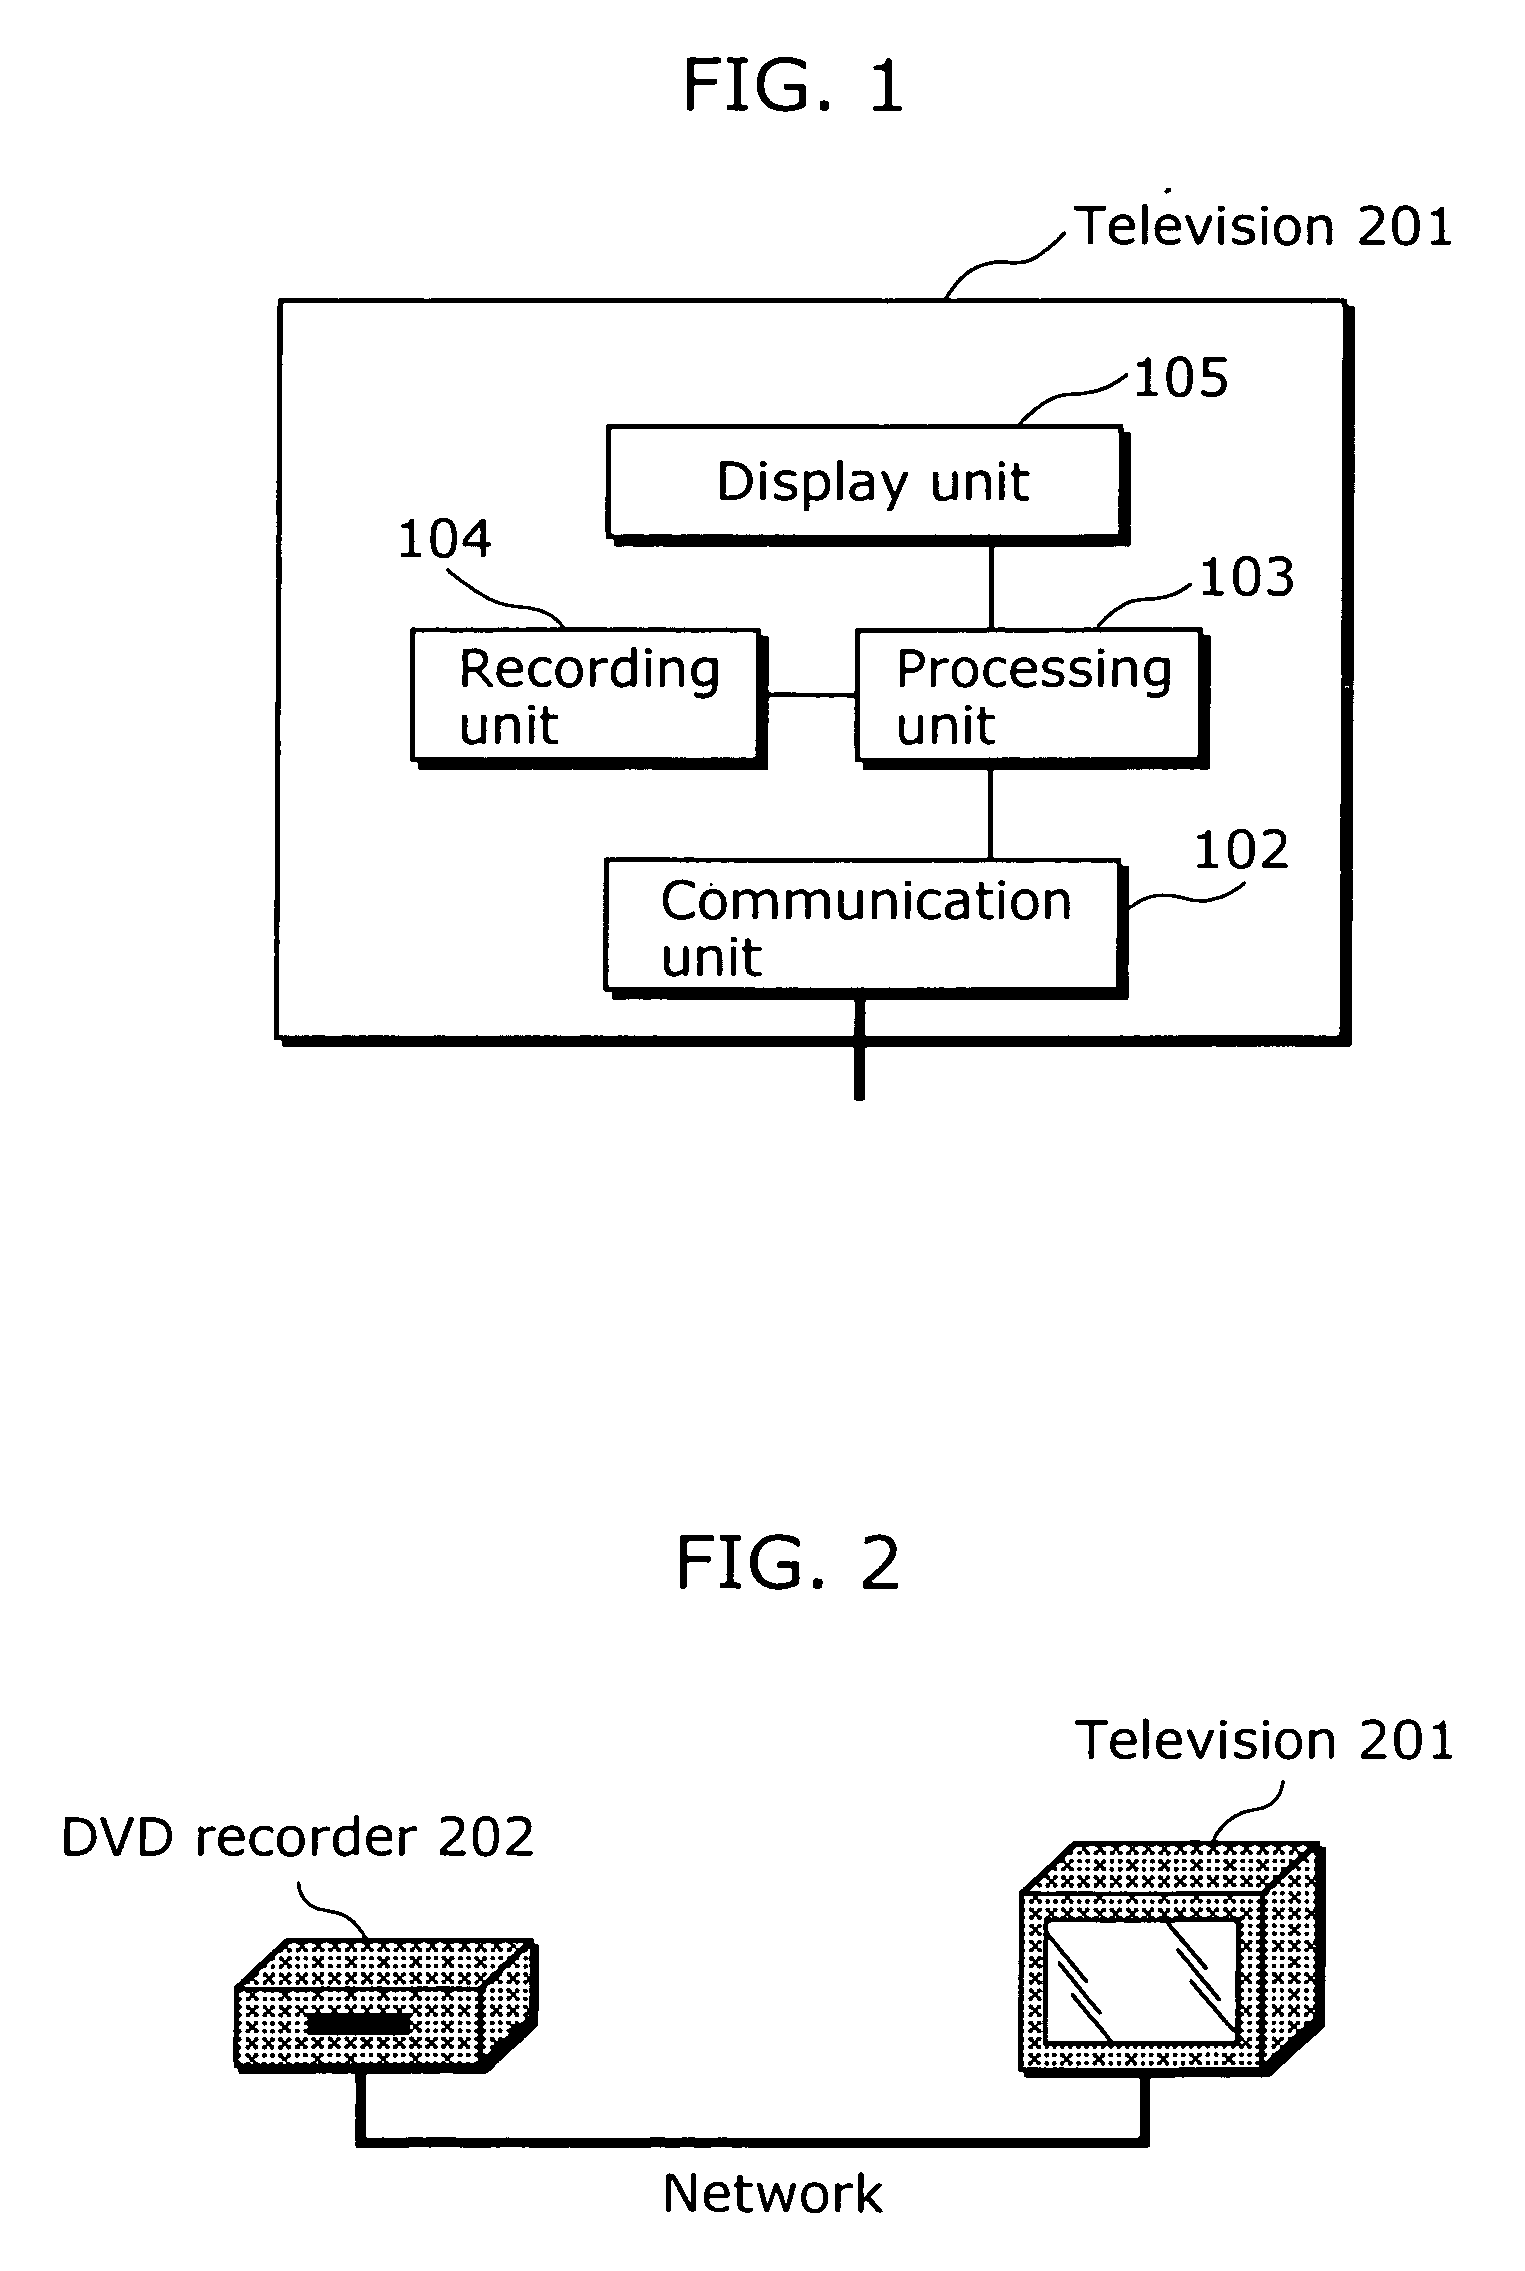 UI display apparatus and method for displaying, on a screen, an icon representing a device connected to a network